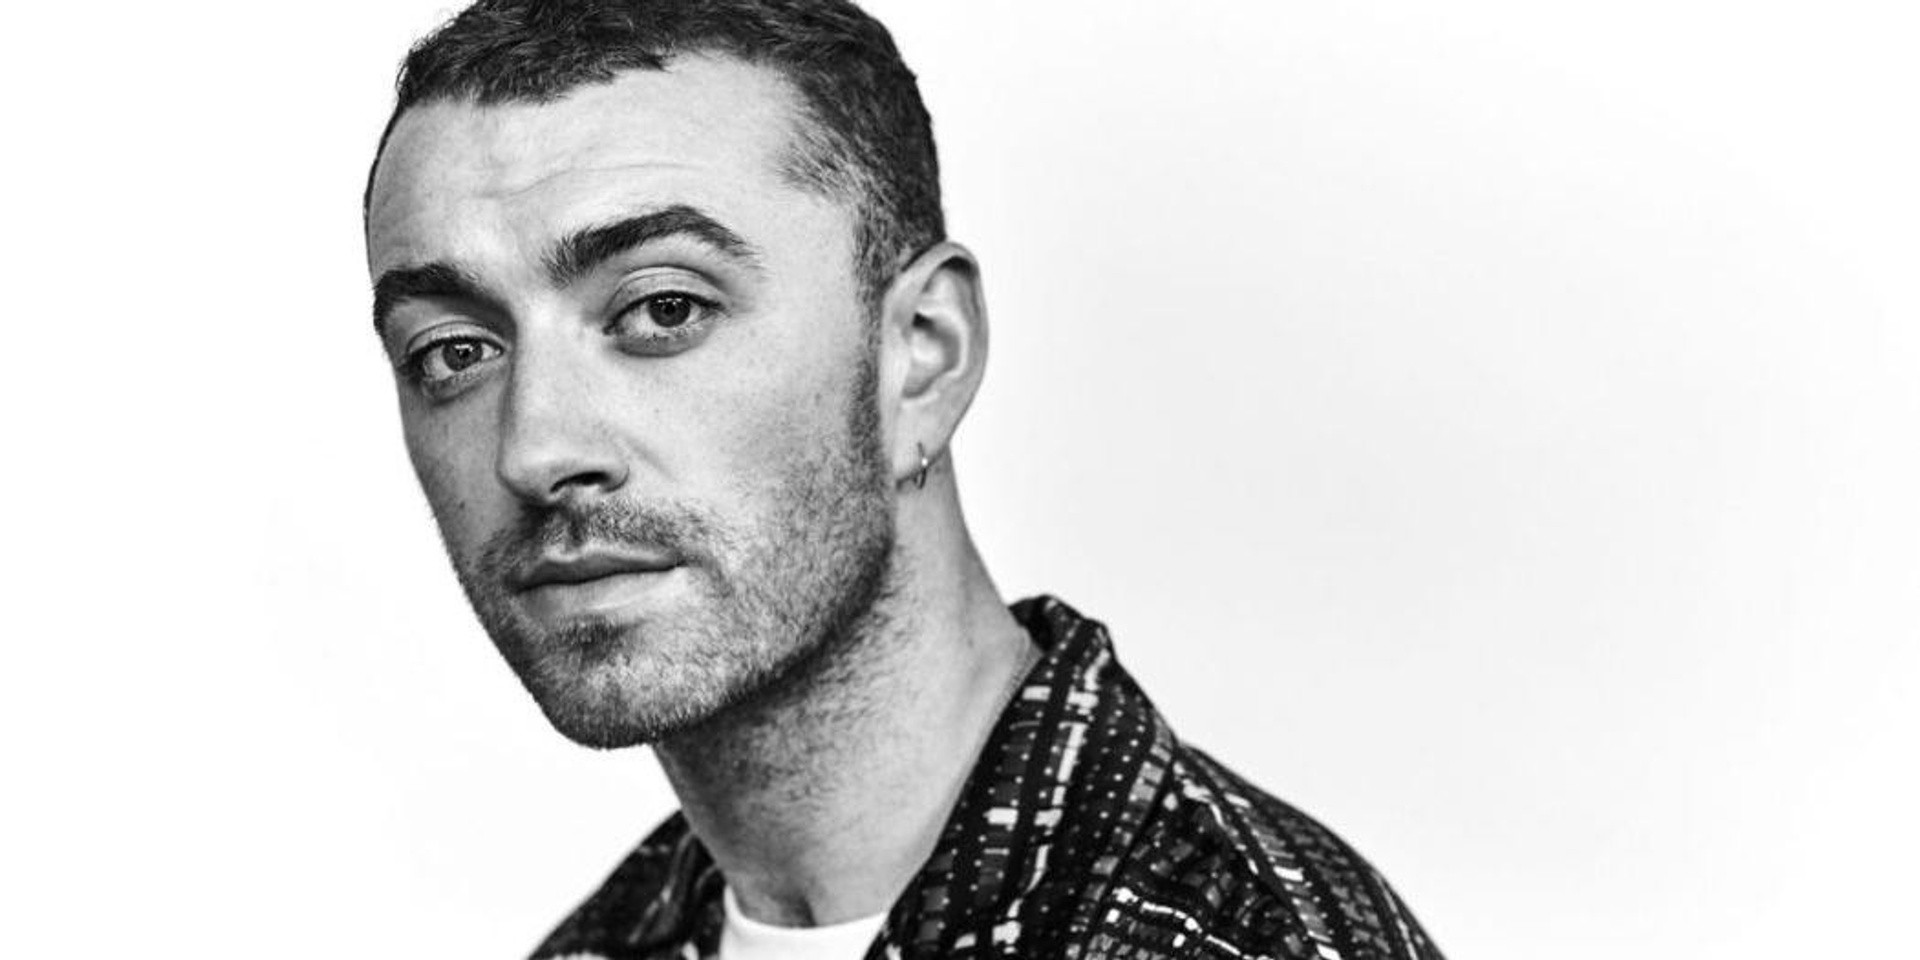 Sam Smith's Singapore show is now sold out; scalpers selling tickets for up to $1,800